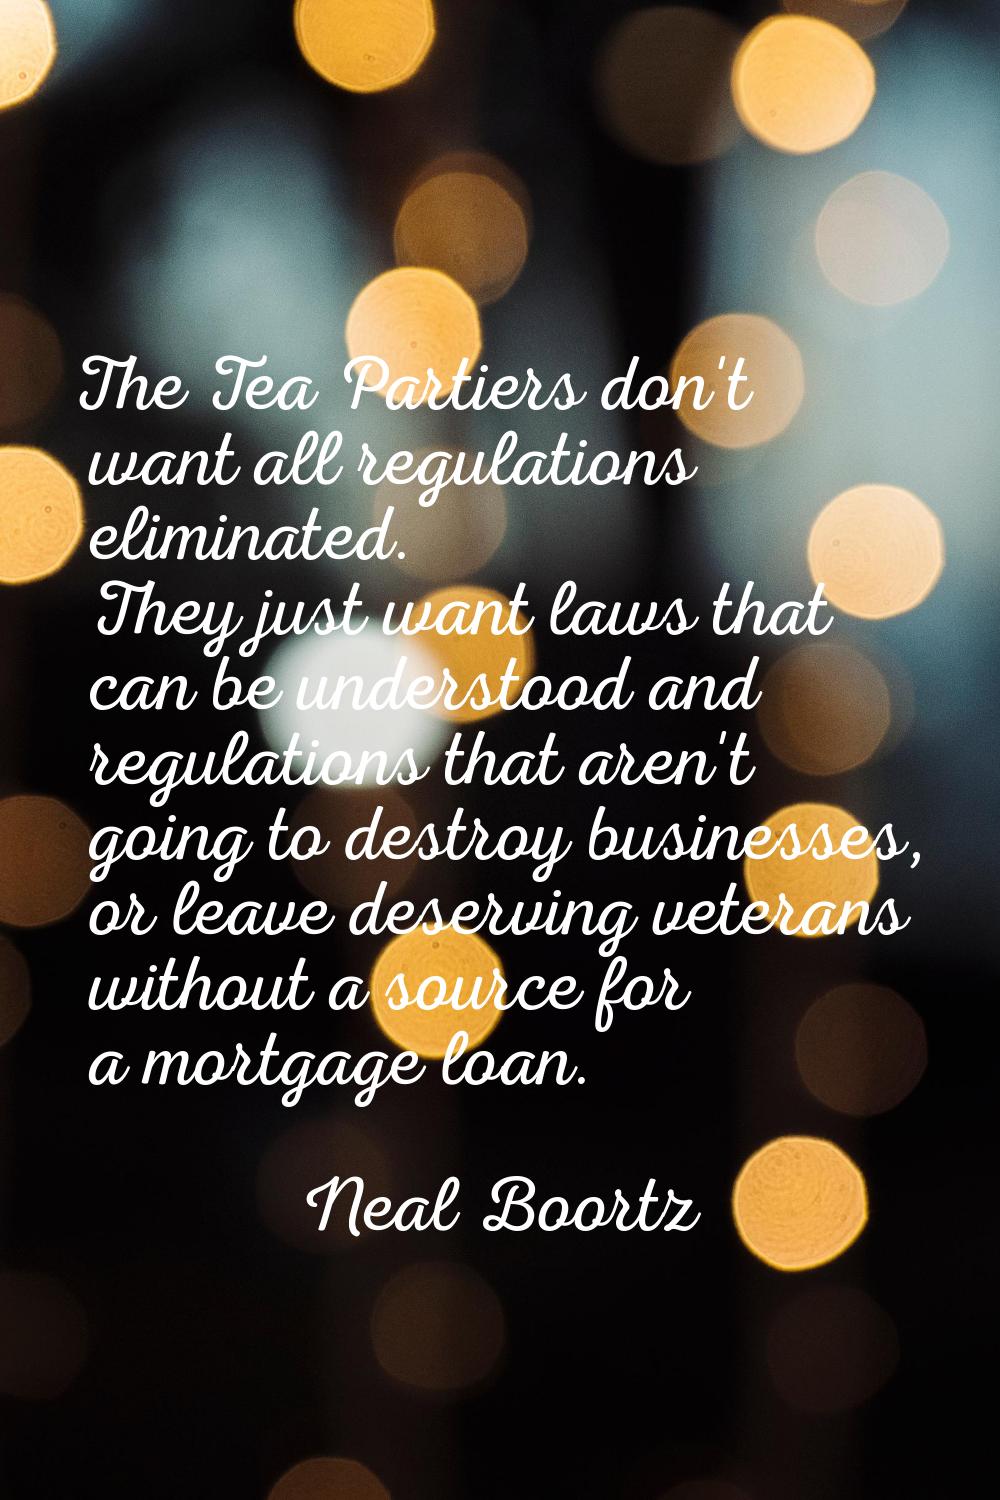 The Tea Partiers don't want all regulations eliminated. They just want laws that can be understood 